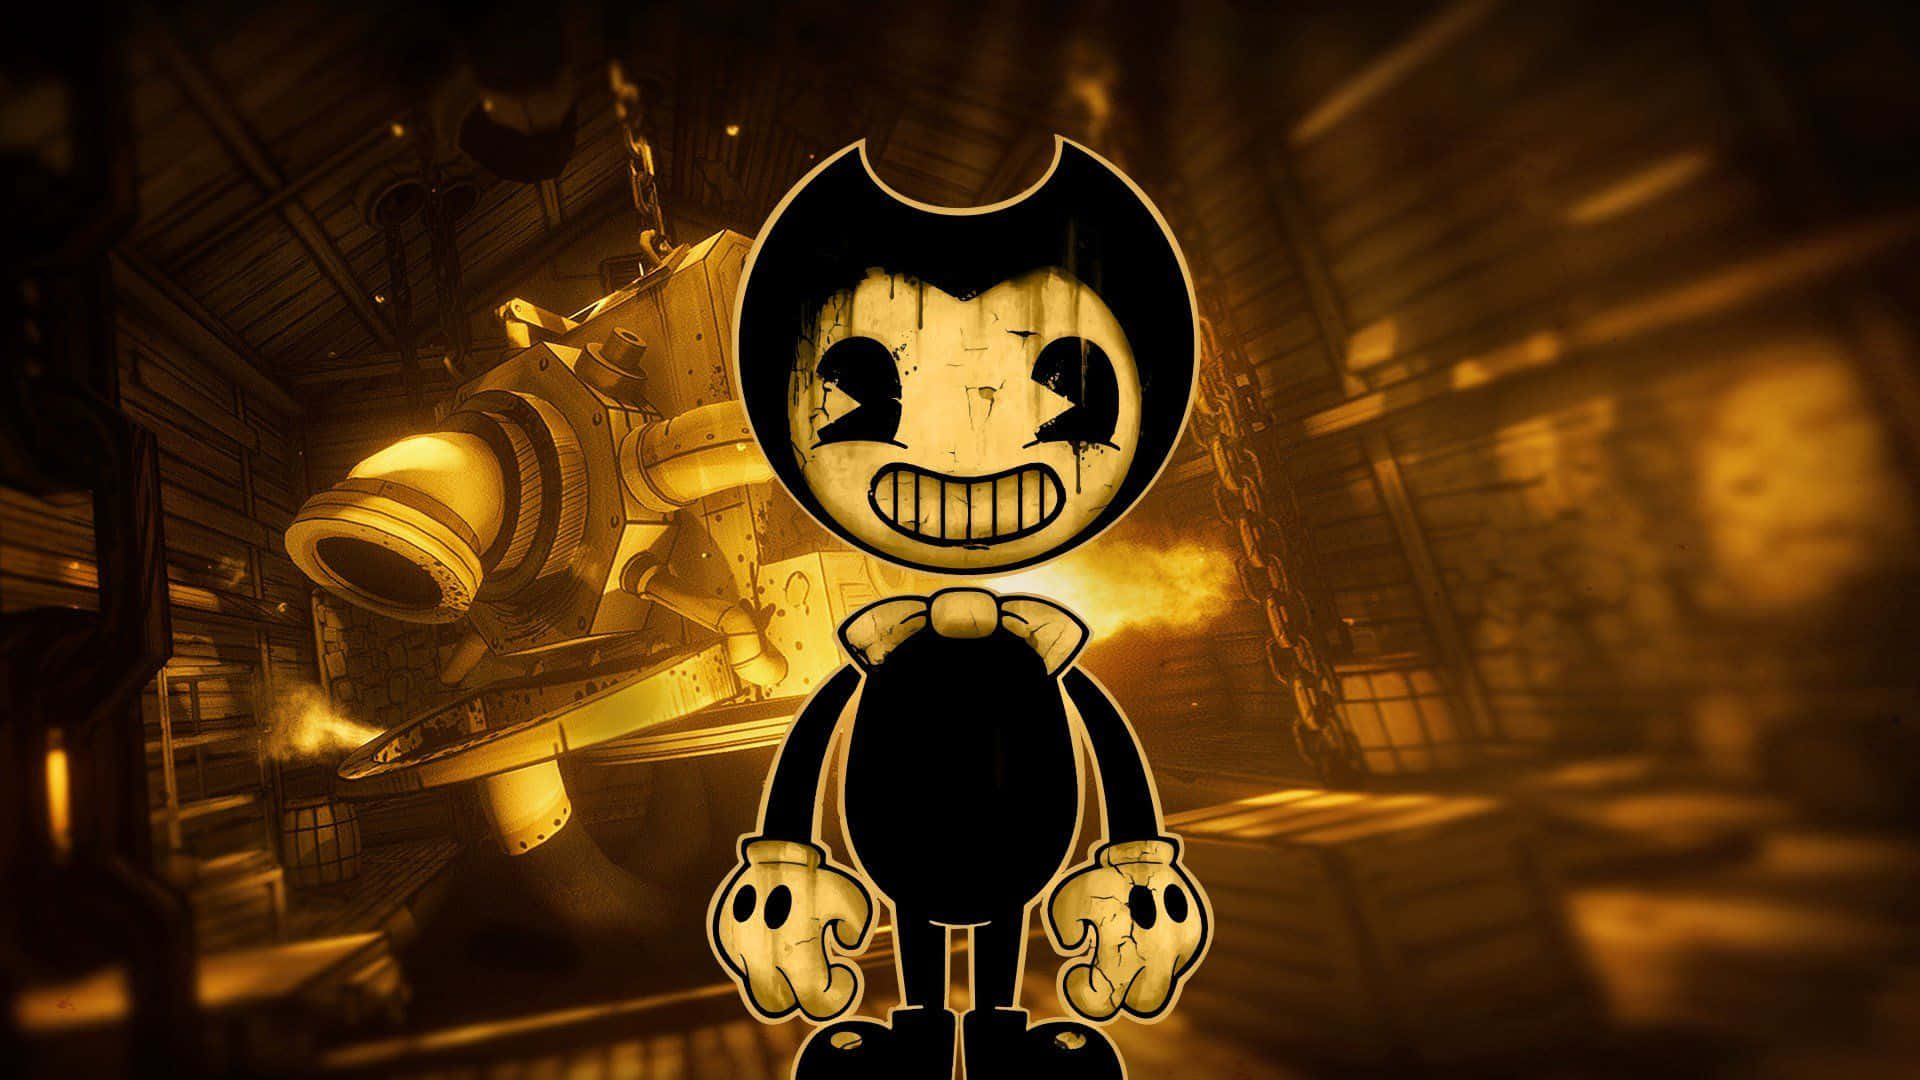 Bendy striking a pose in the vintage world of animation Wallpaper